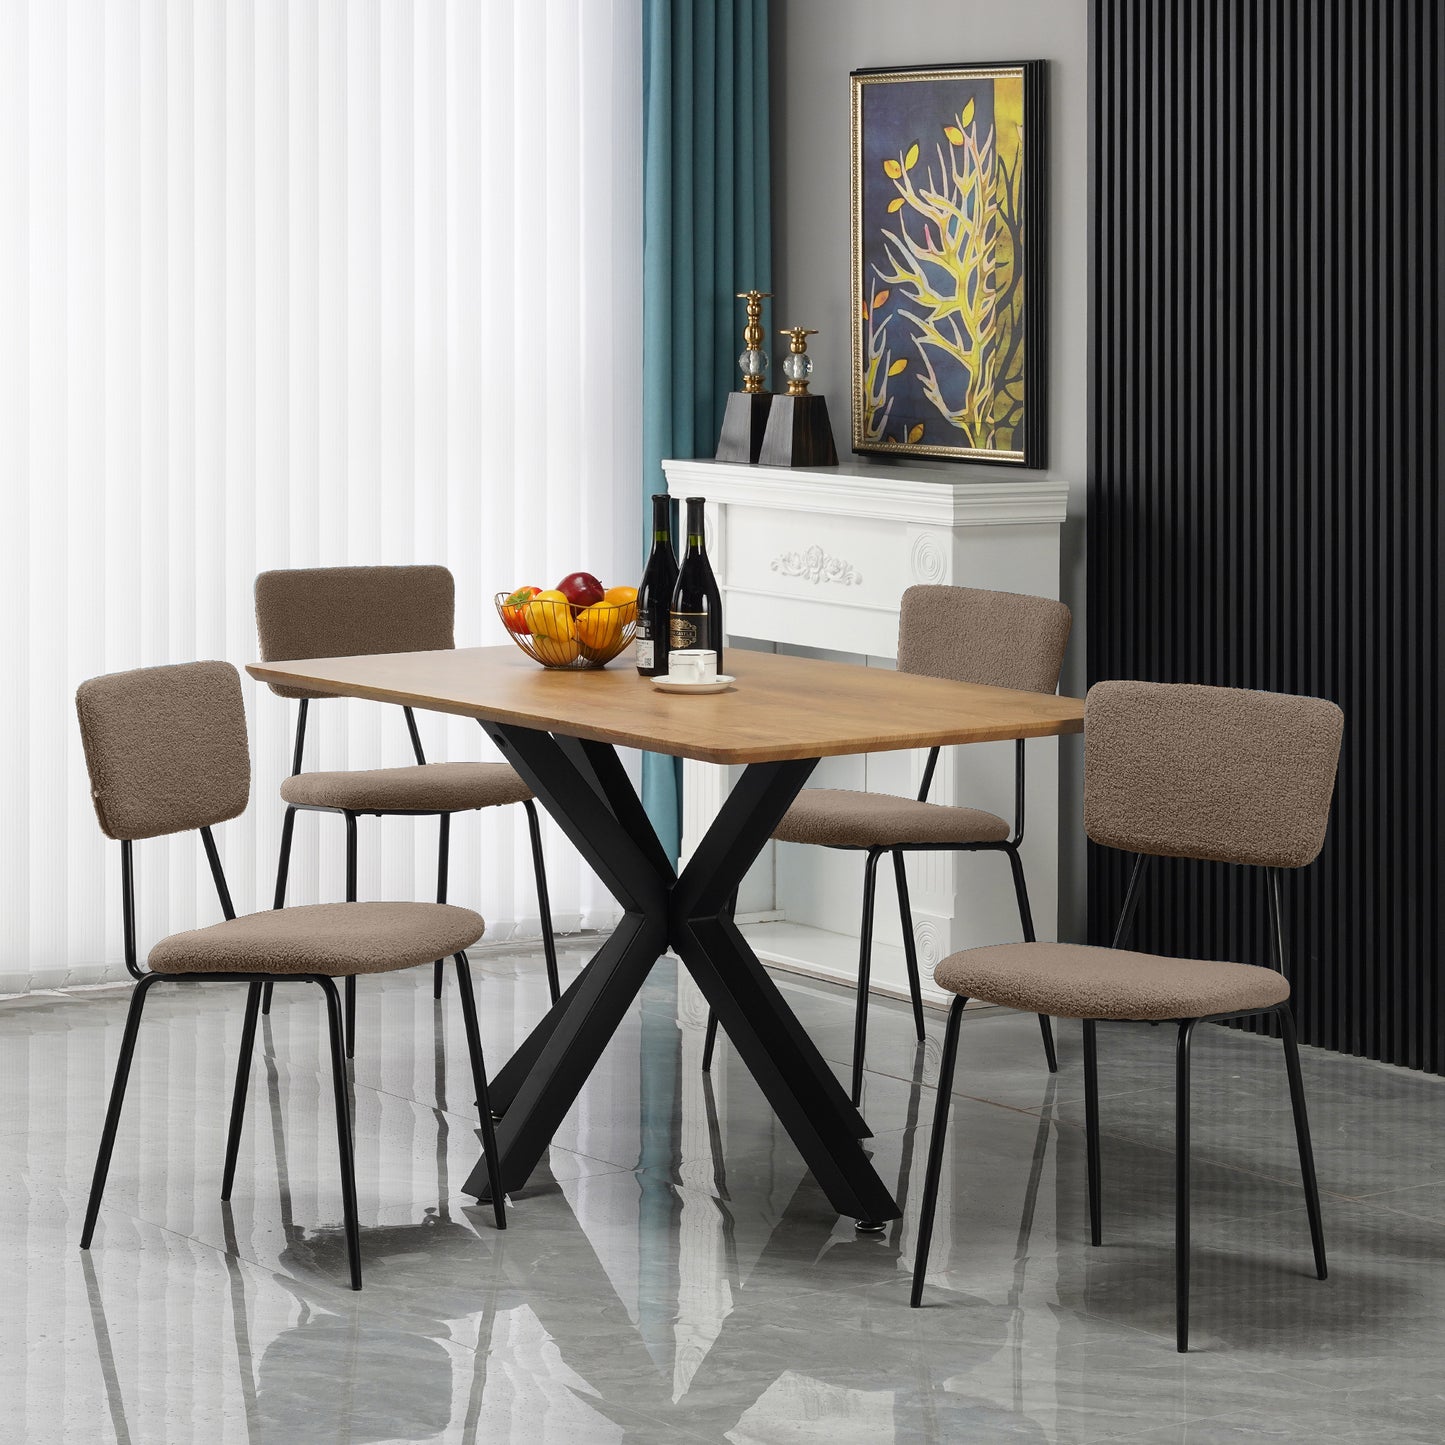 Dining Room Chairs Set of 4, Modern Comfortable Feature Chairs with Faux Plush Upholstered Back and Chrome Legs, Kitchen Side Chairs for Indoor Use: Home, Apartment (4 Brown Chairs)